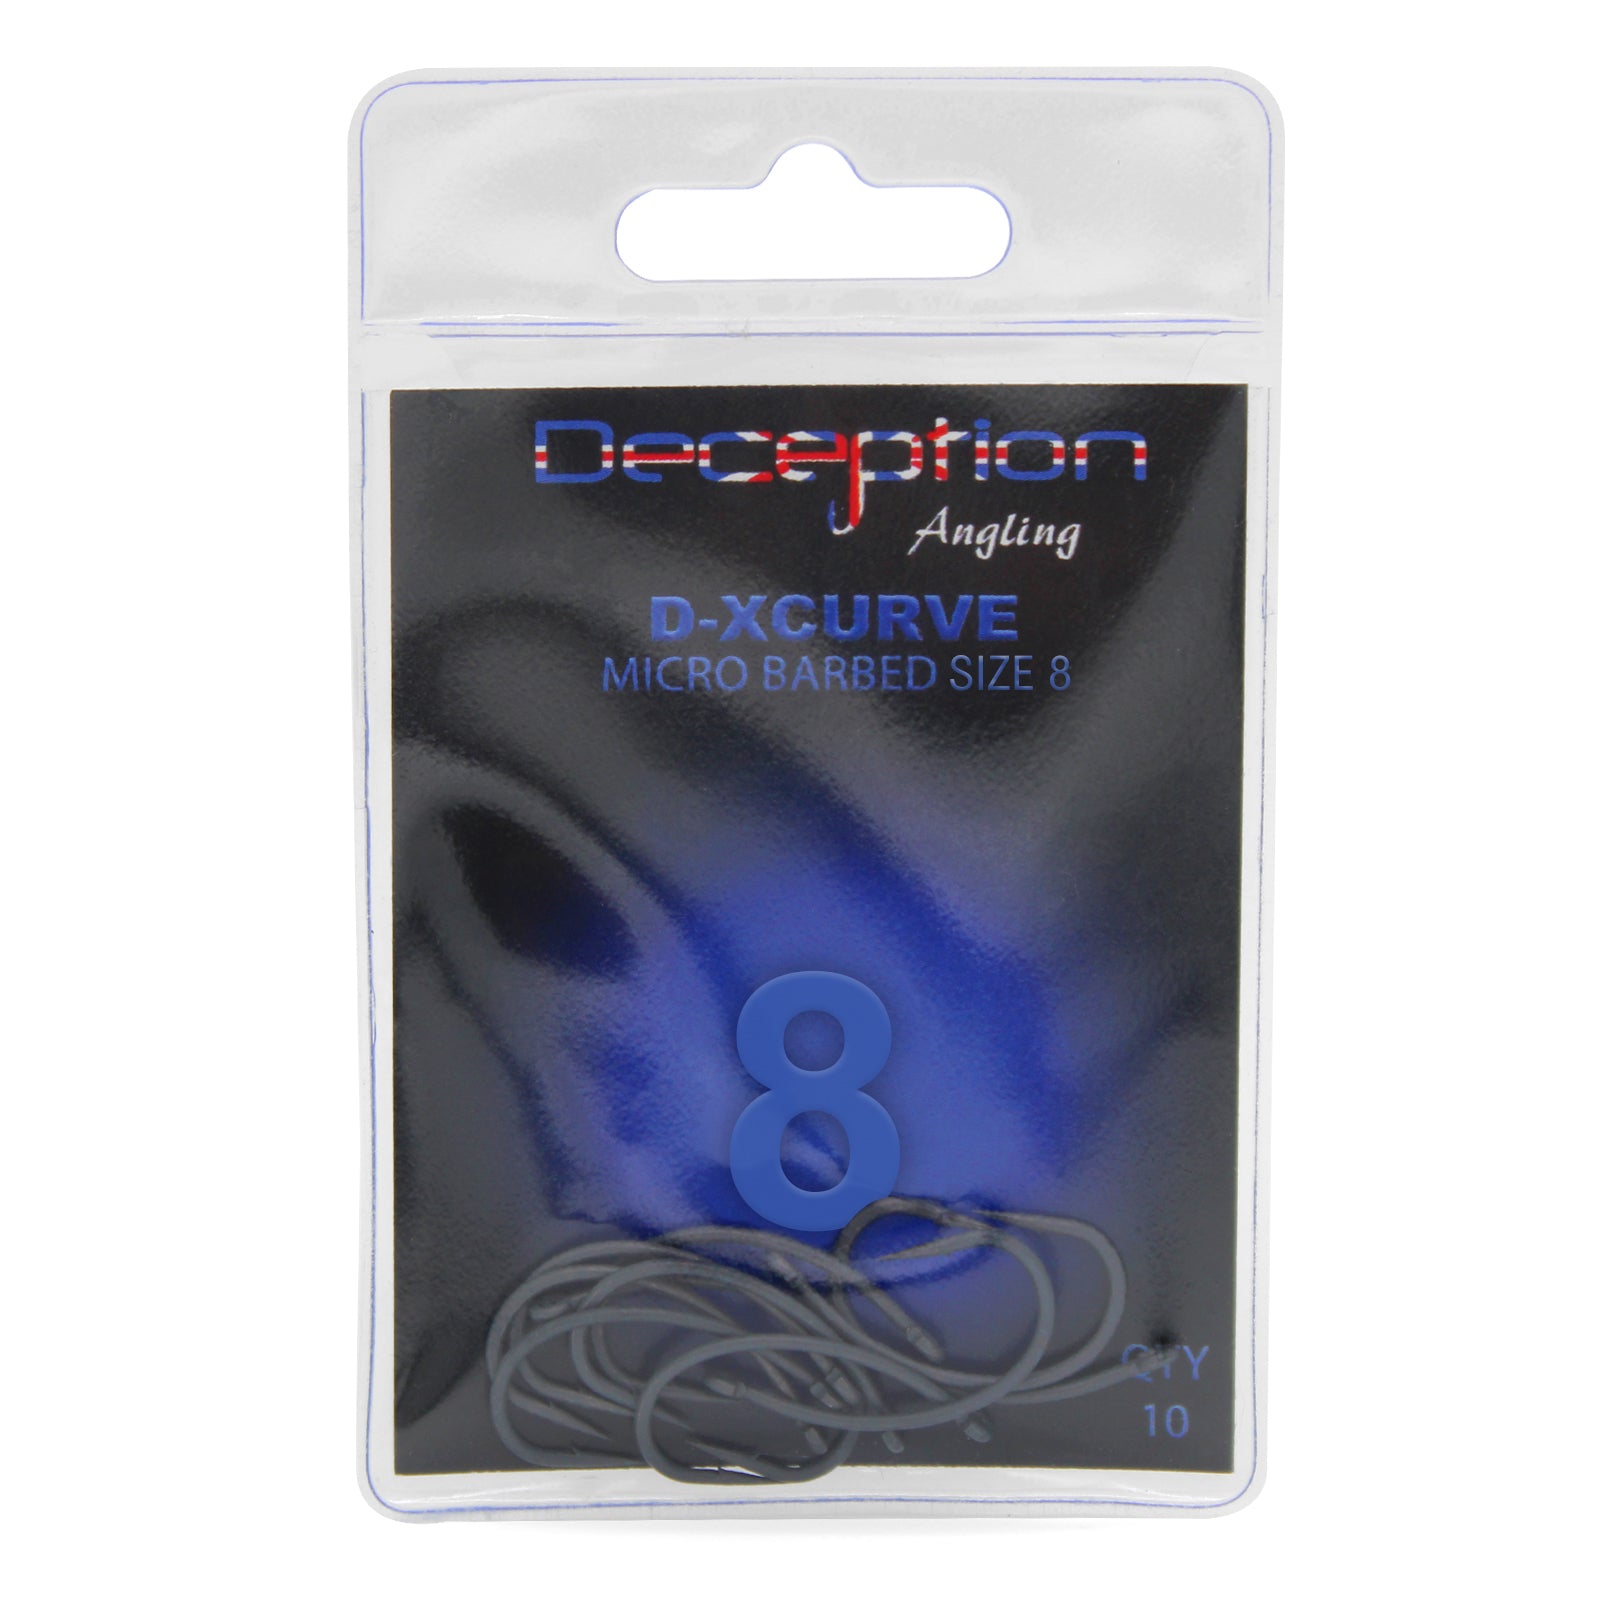 Deception Angling D-XCurve Micro Barbed Fishing Hooks Pack of 10 Size 8